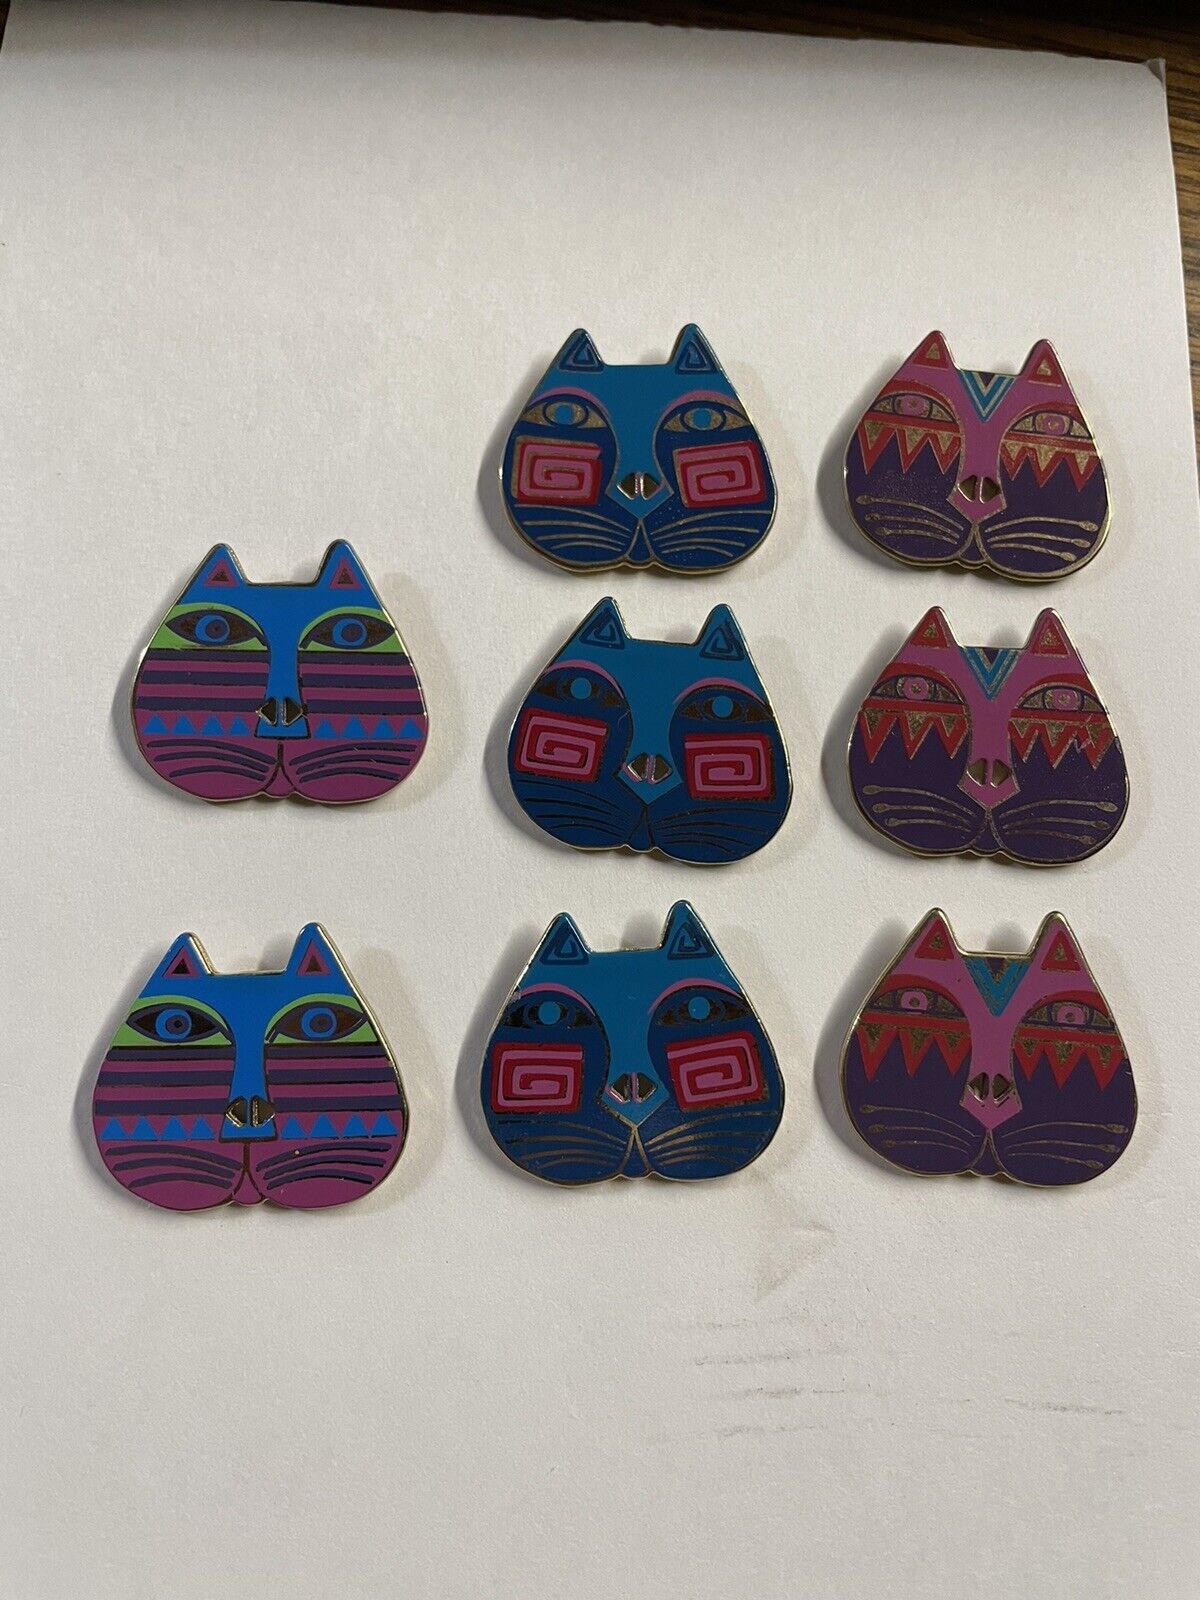 Colorful Laurel Burch CAT Metal Button Dill Backmarked- Lot Sale 8 Buttons